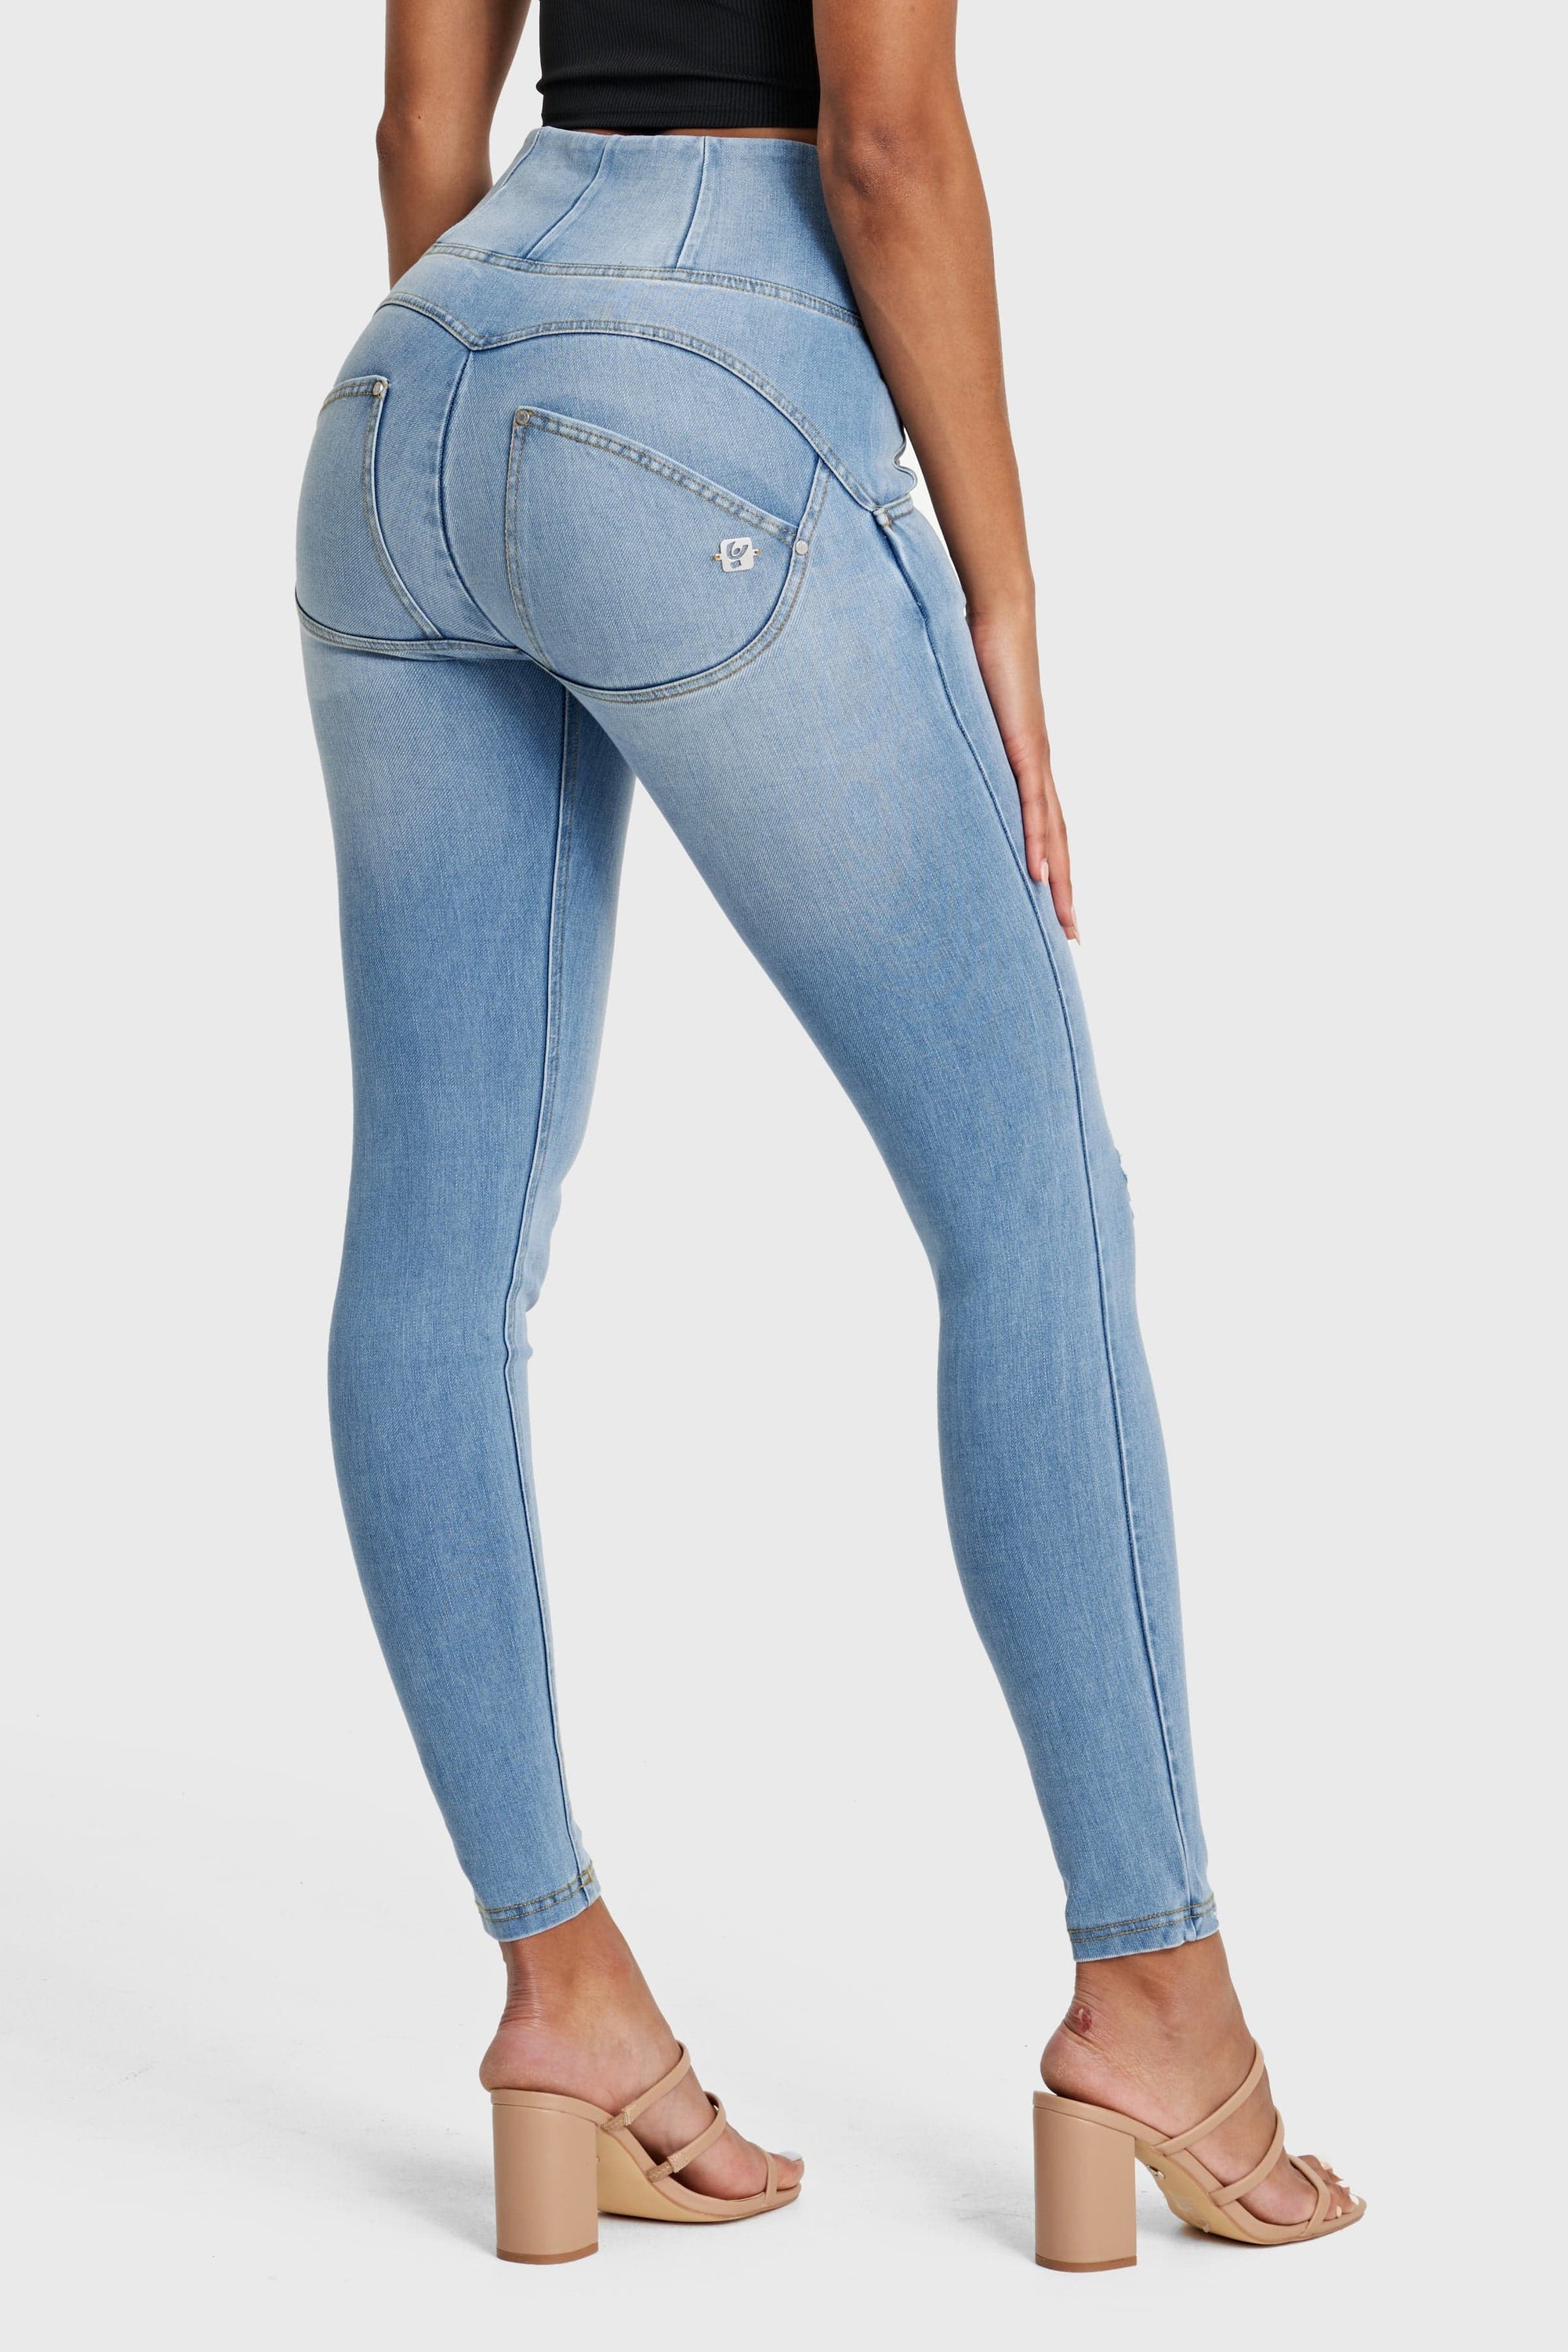 WR.UP® Snug Distressed Jeans - High Waisted - Full Length - Light Blue + Yellow Stitching 10